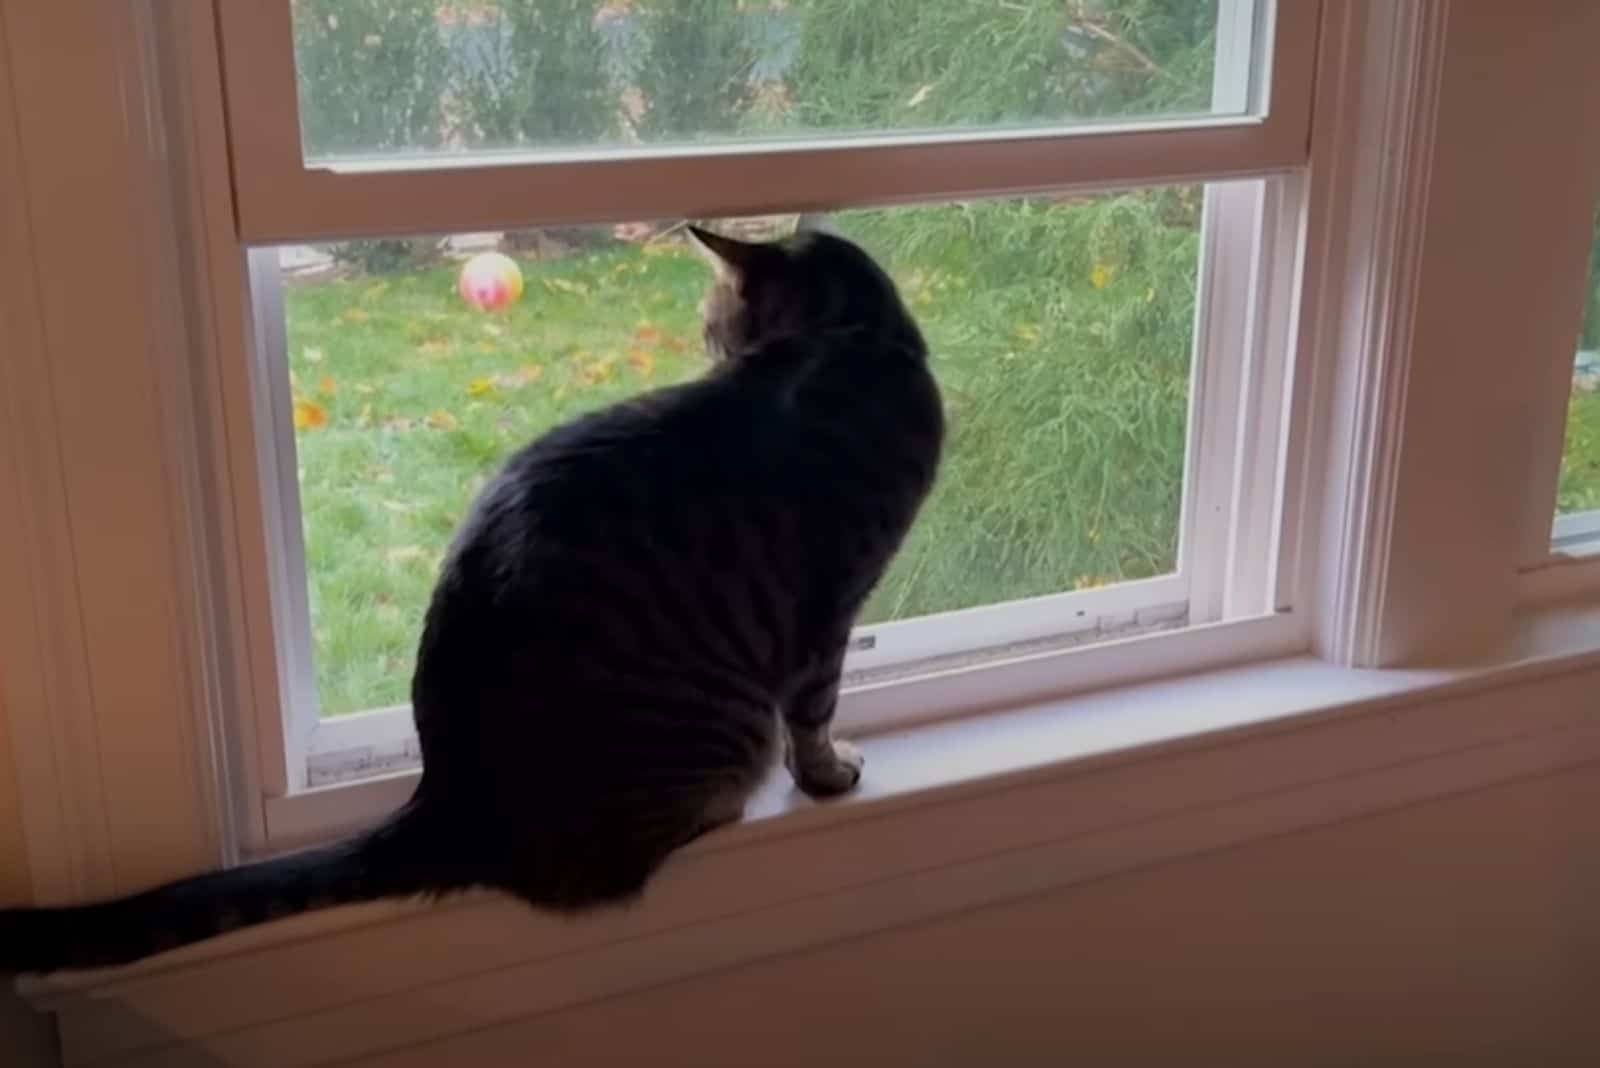 the house cat is sitting by the window